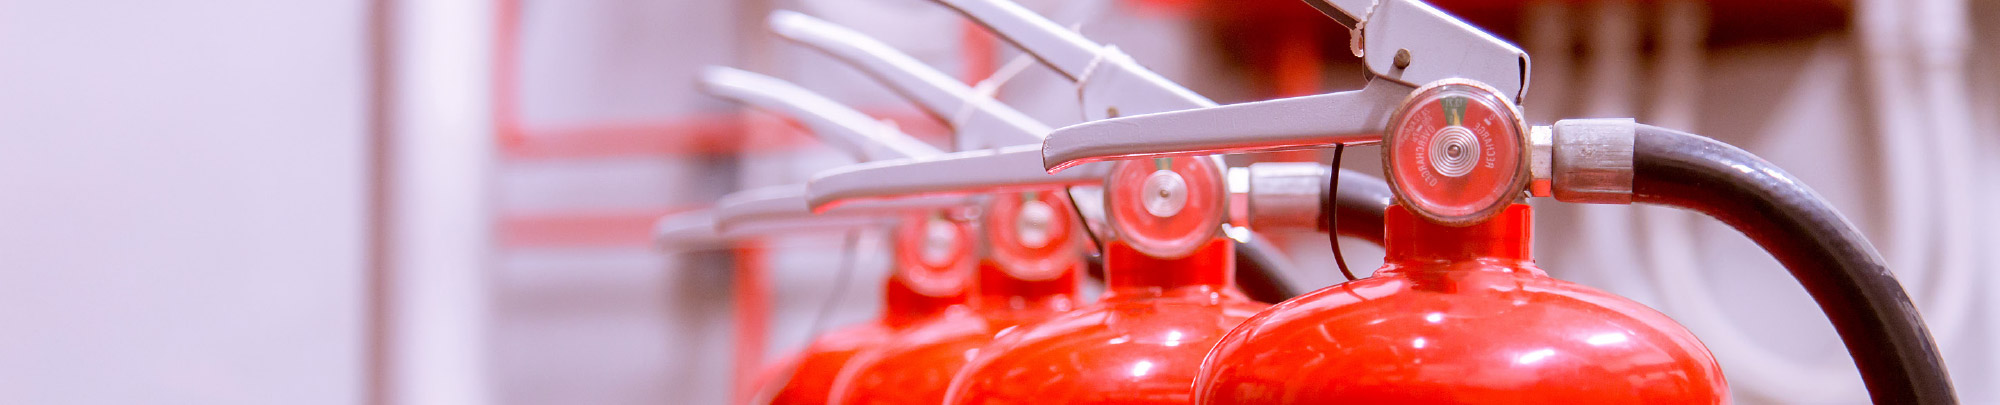 Line Of Fire Extinguishers